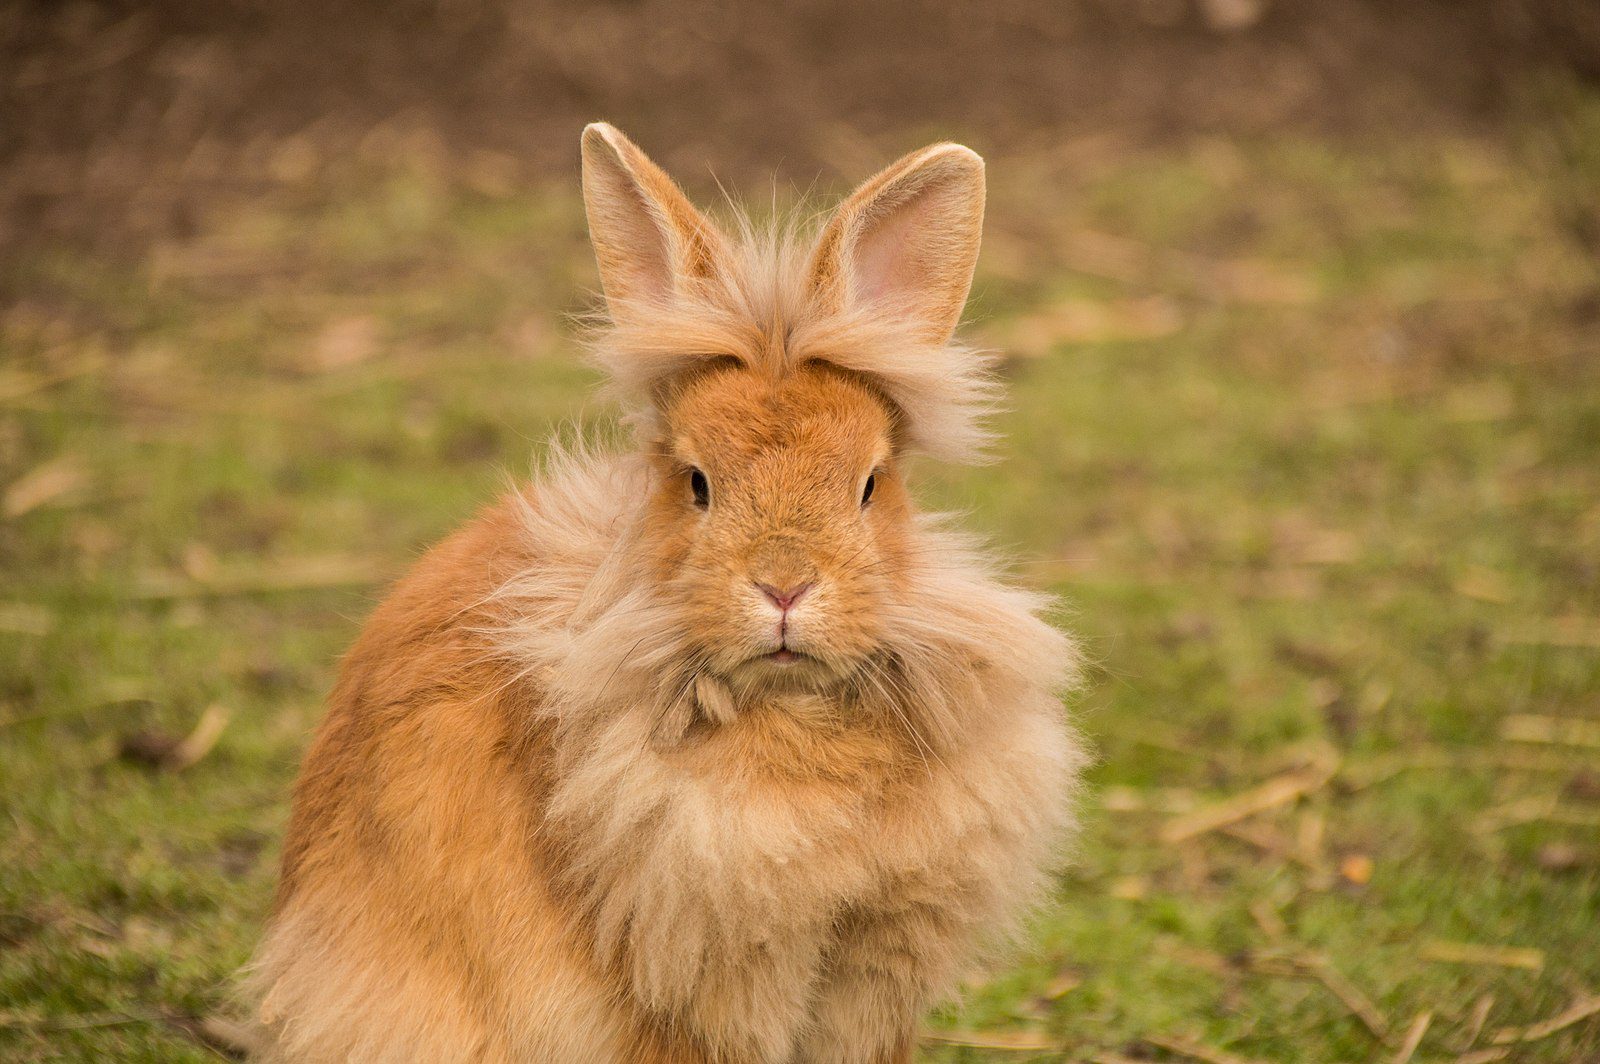 The Lionhead Rabbit - Complete Guide & Top Facts